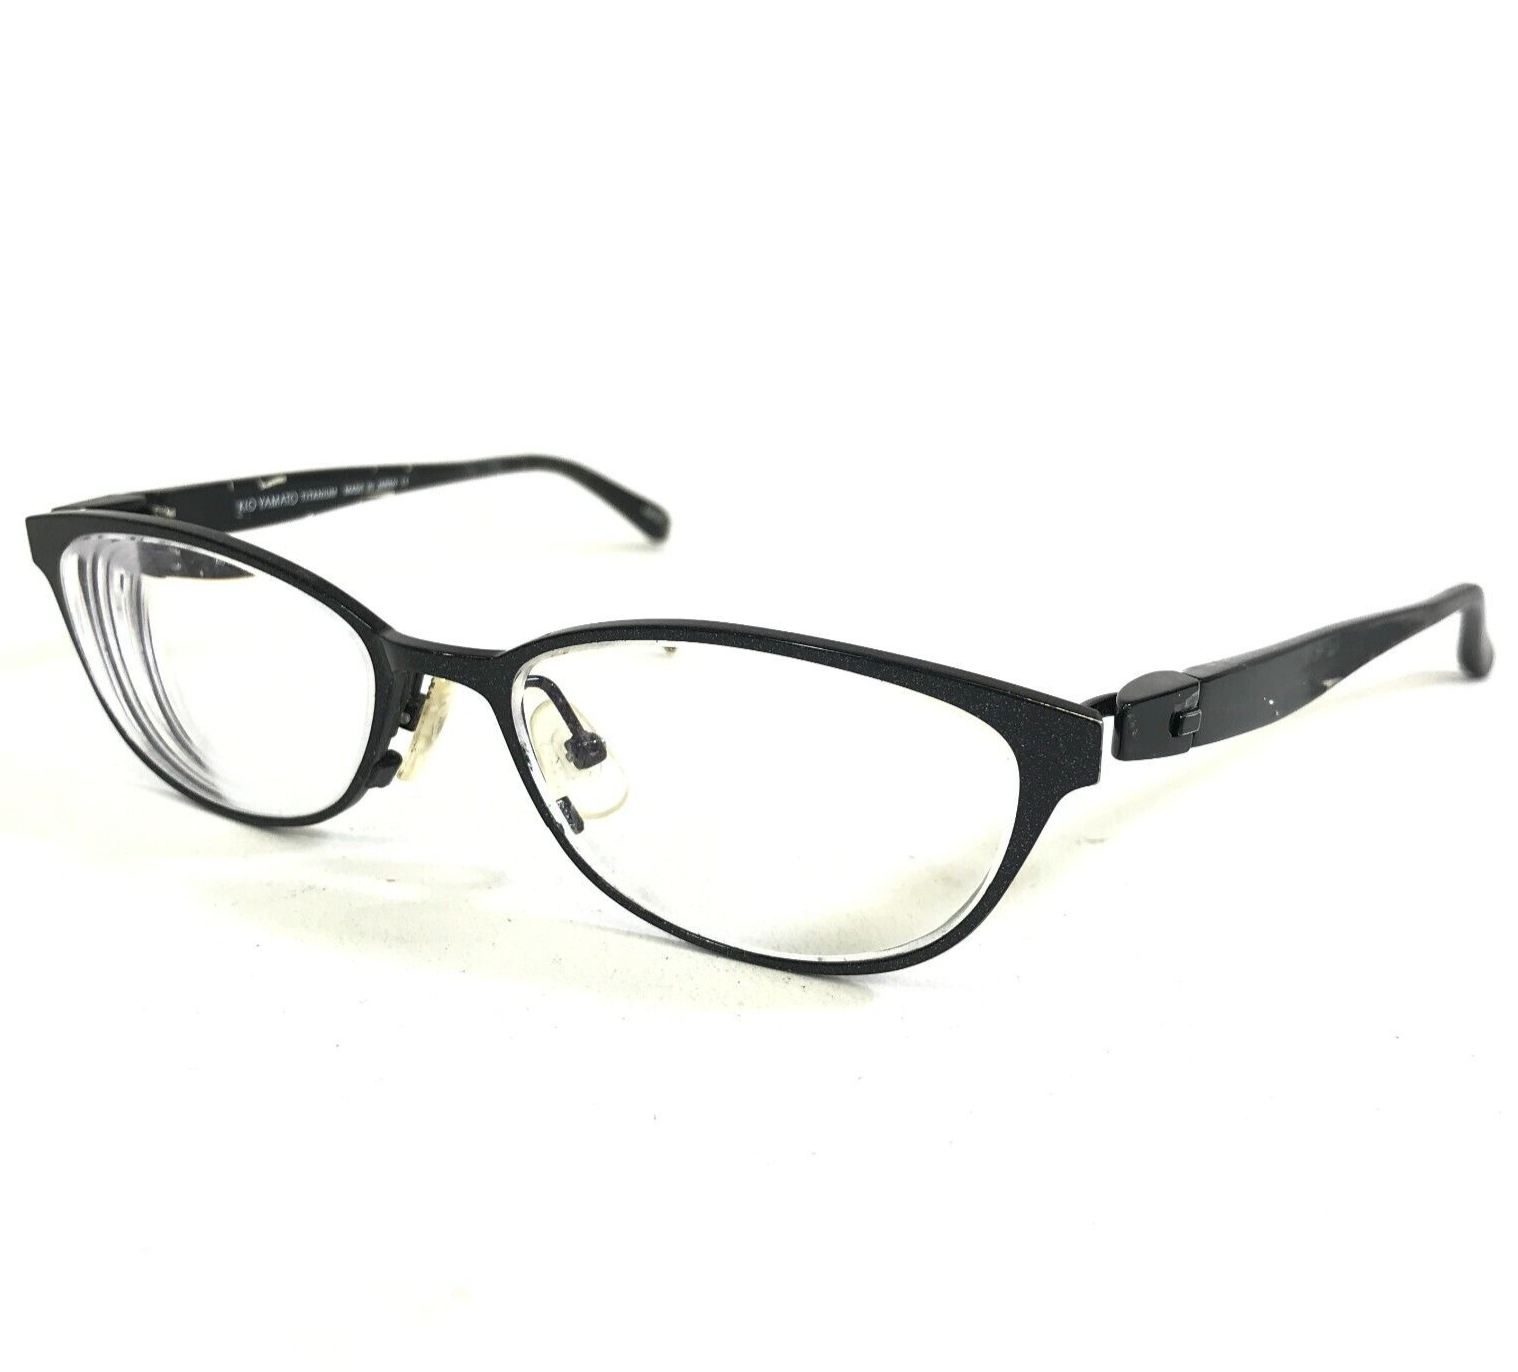 Primary image for Kio Yamato Eyeglasses Frames KT-351 col.32 Black Clear Marble Oval 50-15-130